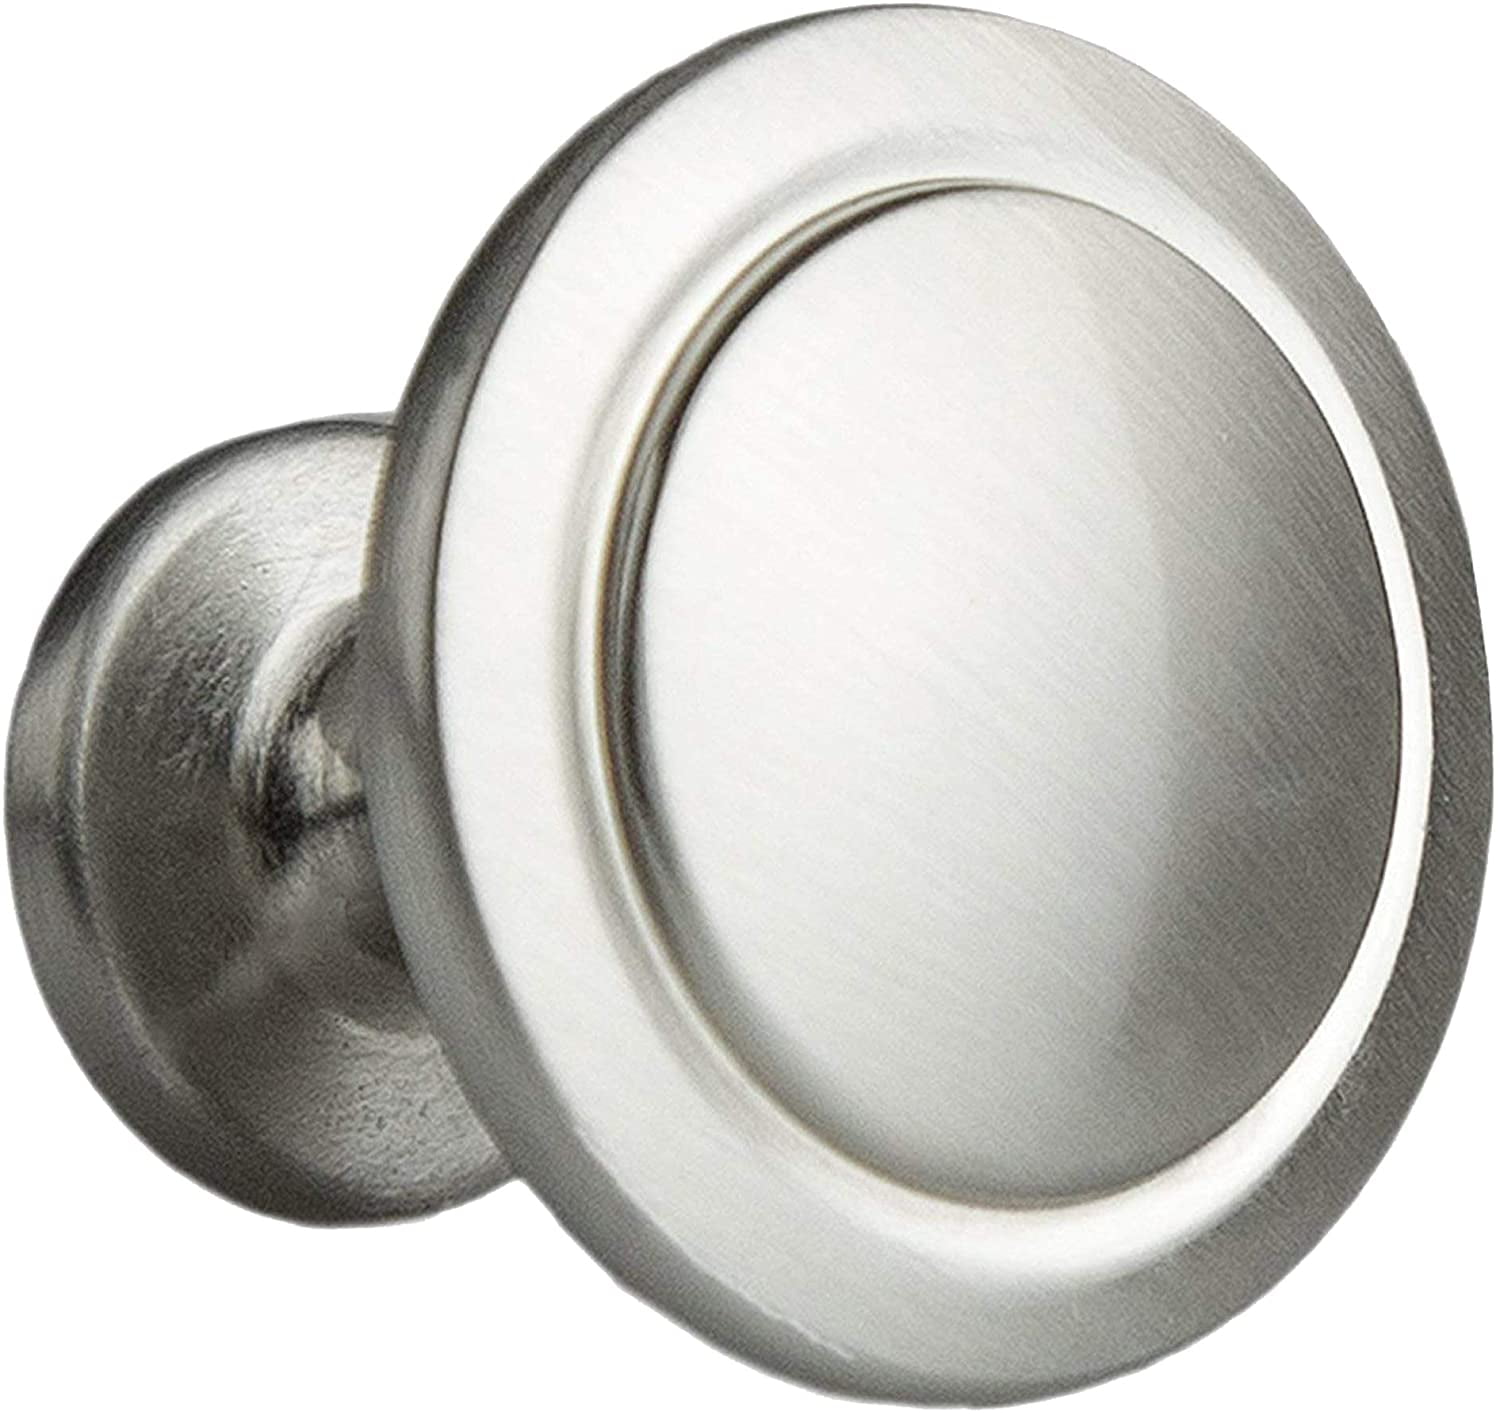 10 Pack Brushed Satin Nickel Cabinet, Round Cabinet Pulls